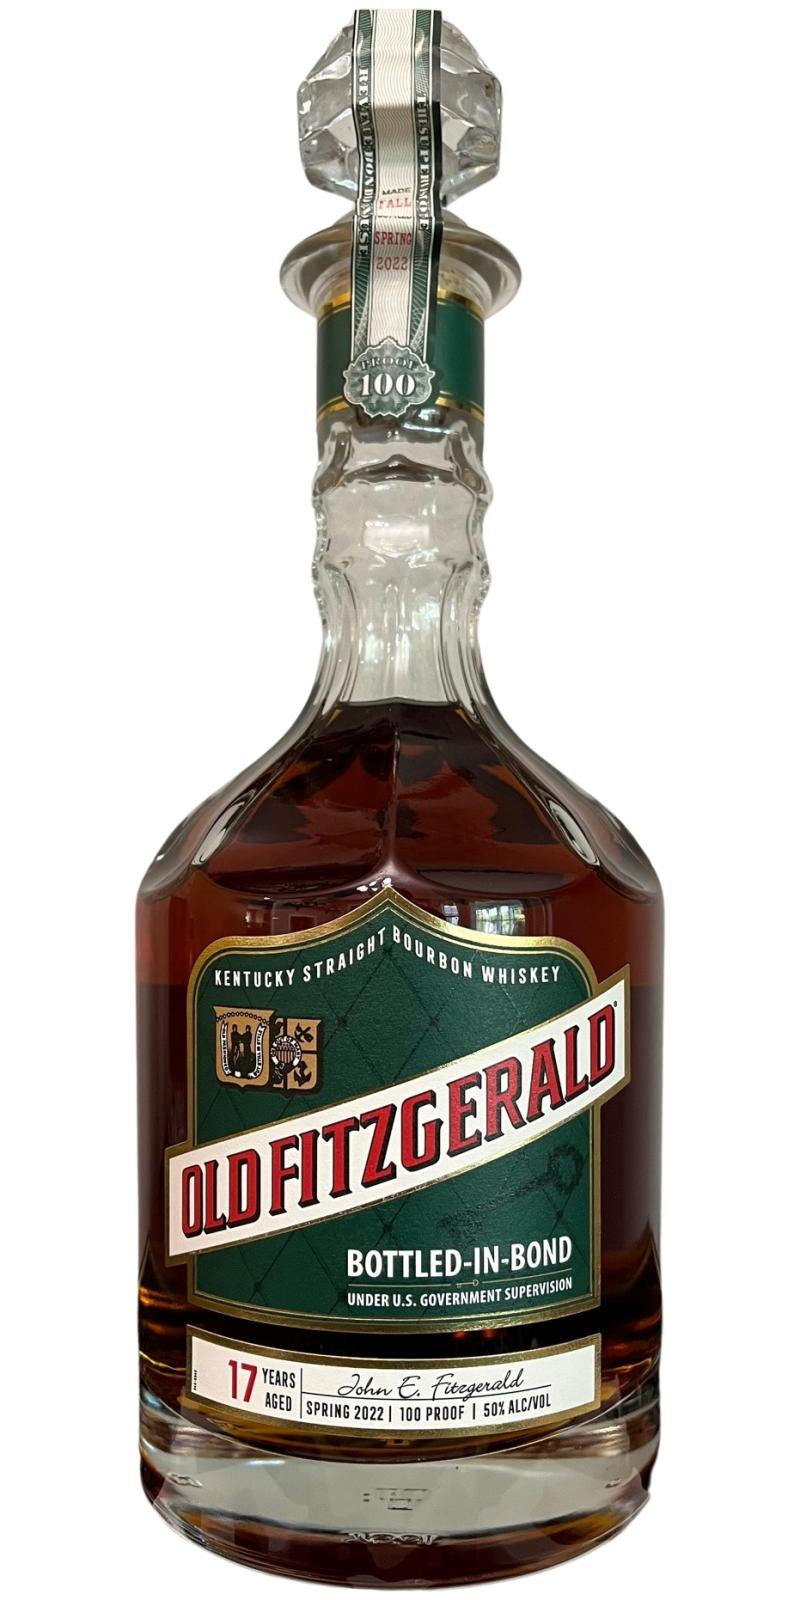 Old Fitzgerald 17yearold Ratings and reviews Whiskybase